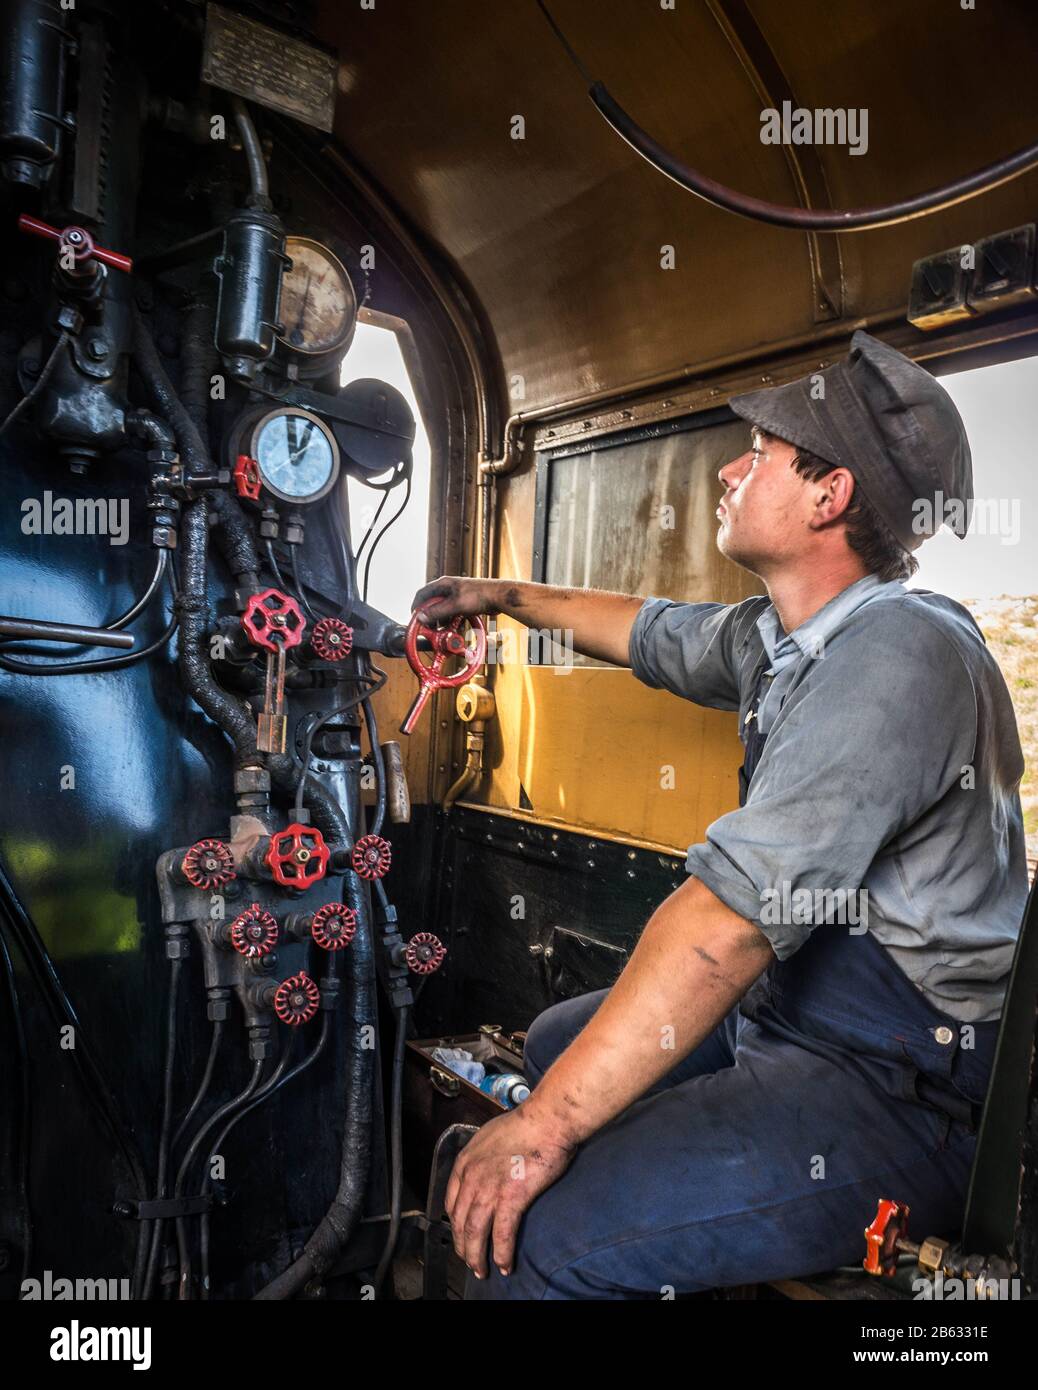 Young man volunteering as a steam engine fireman and engineer sitting in steam locomotive engine looking out window with hand on controls. Stock Photo